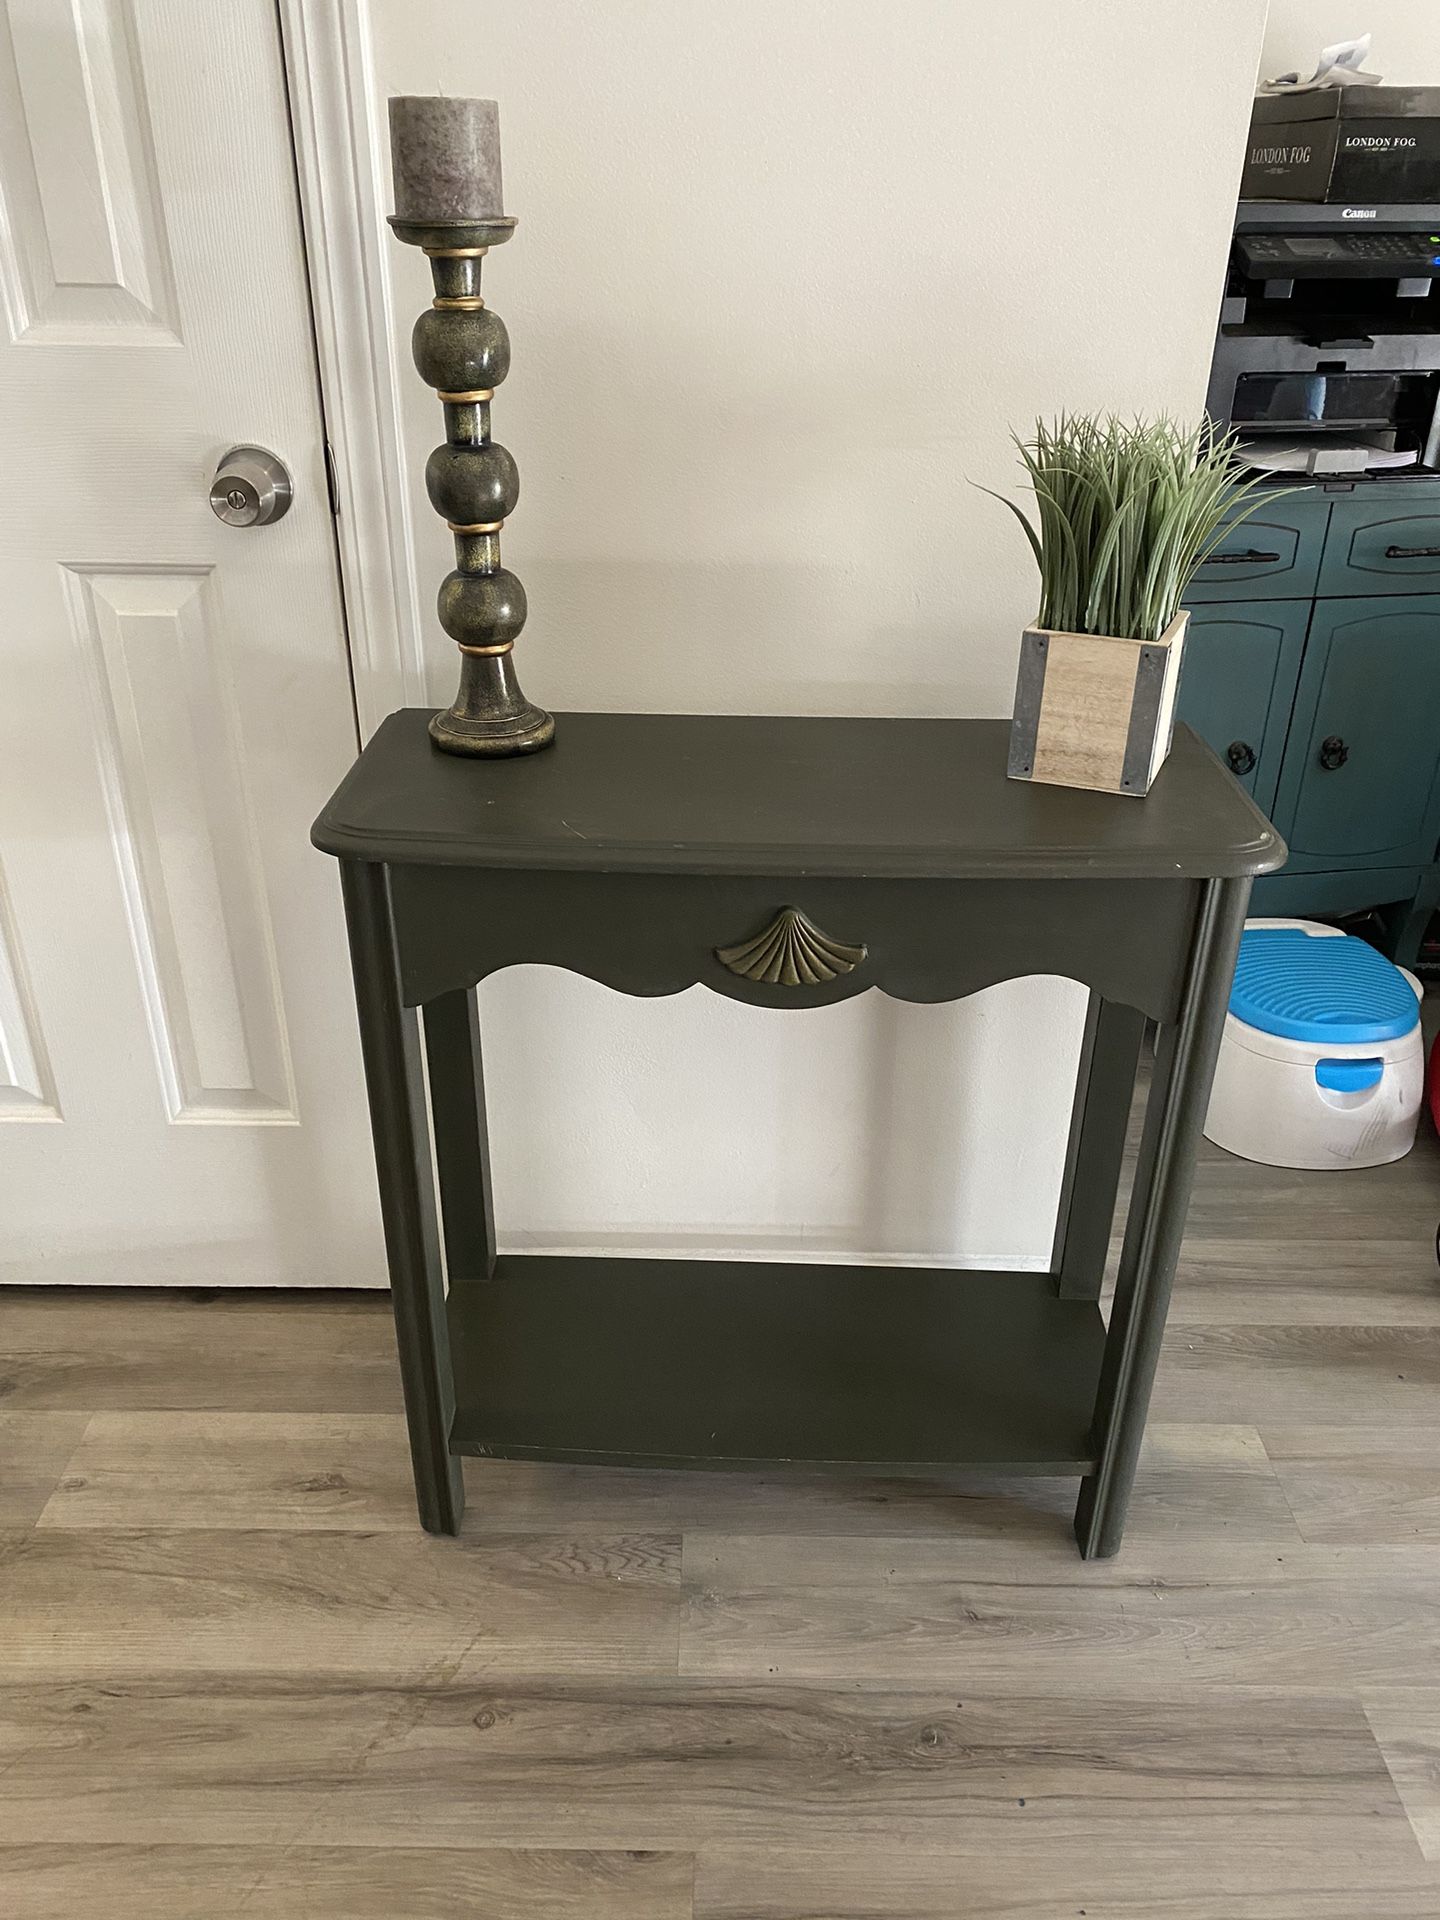 Small Wood Accent Table With Candle Holder And Candle